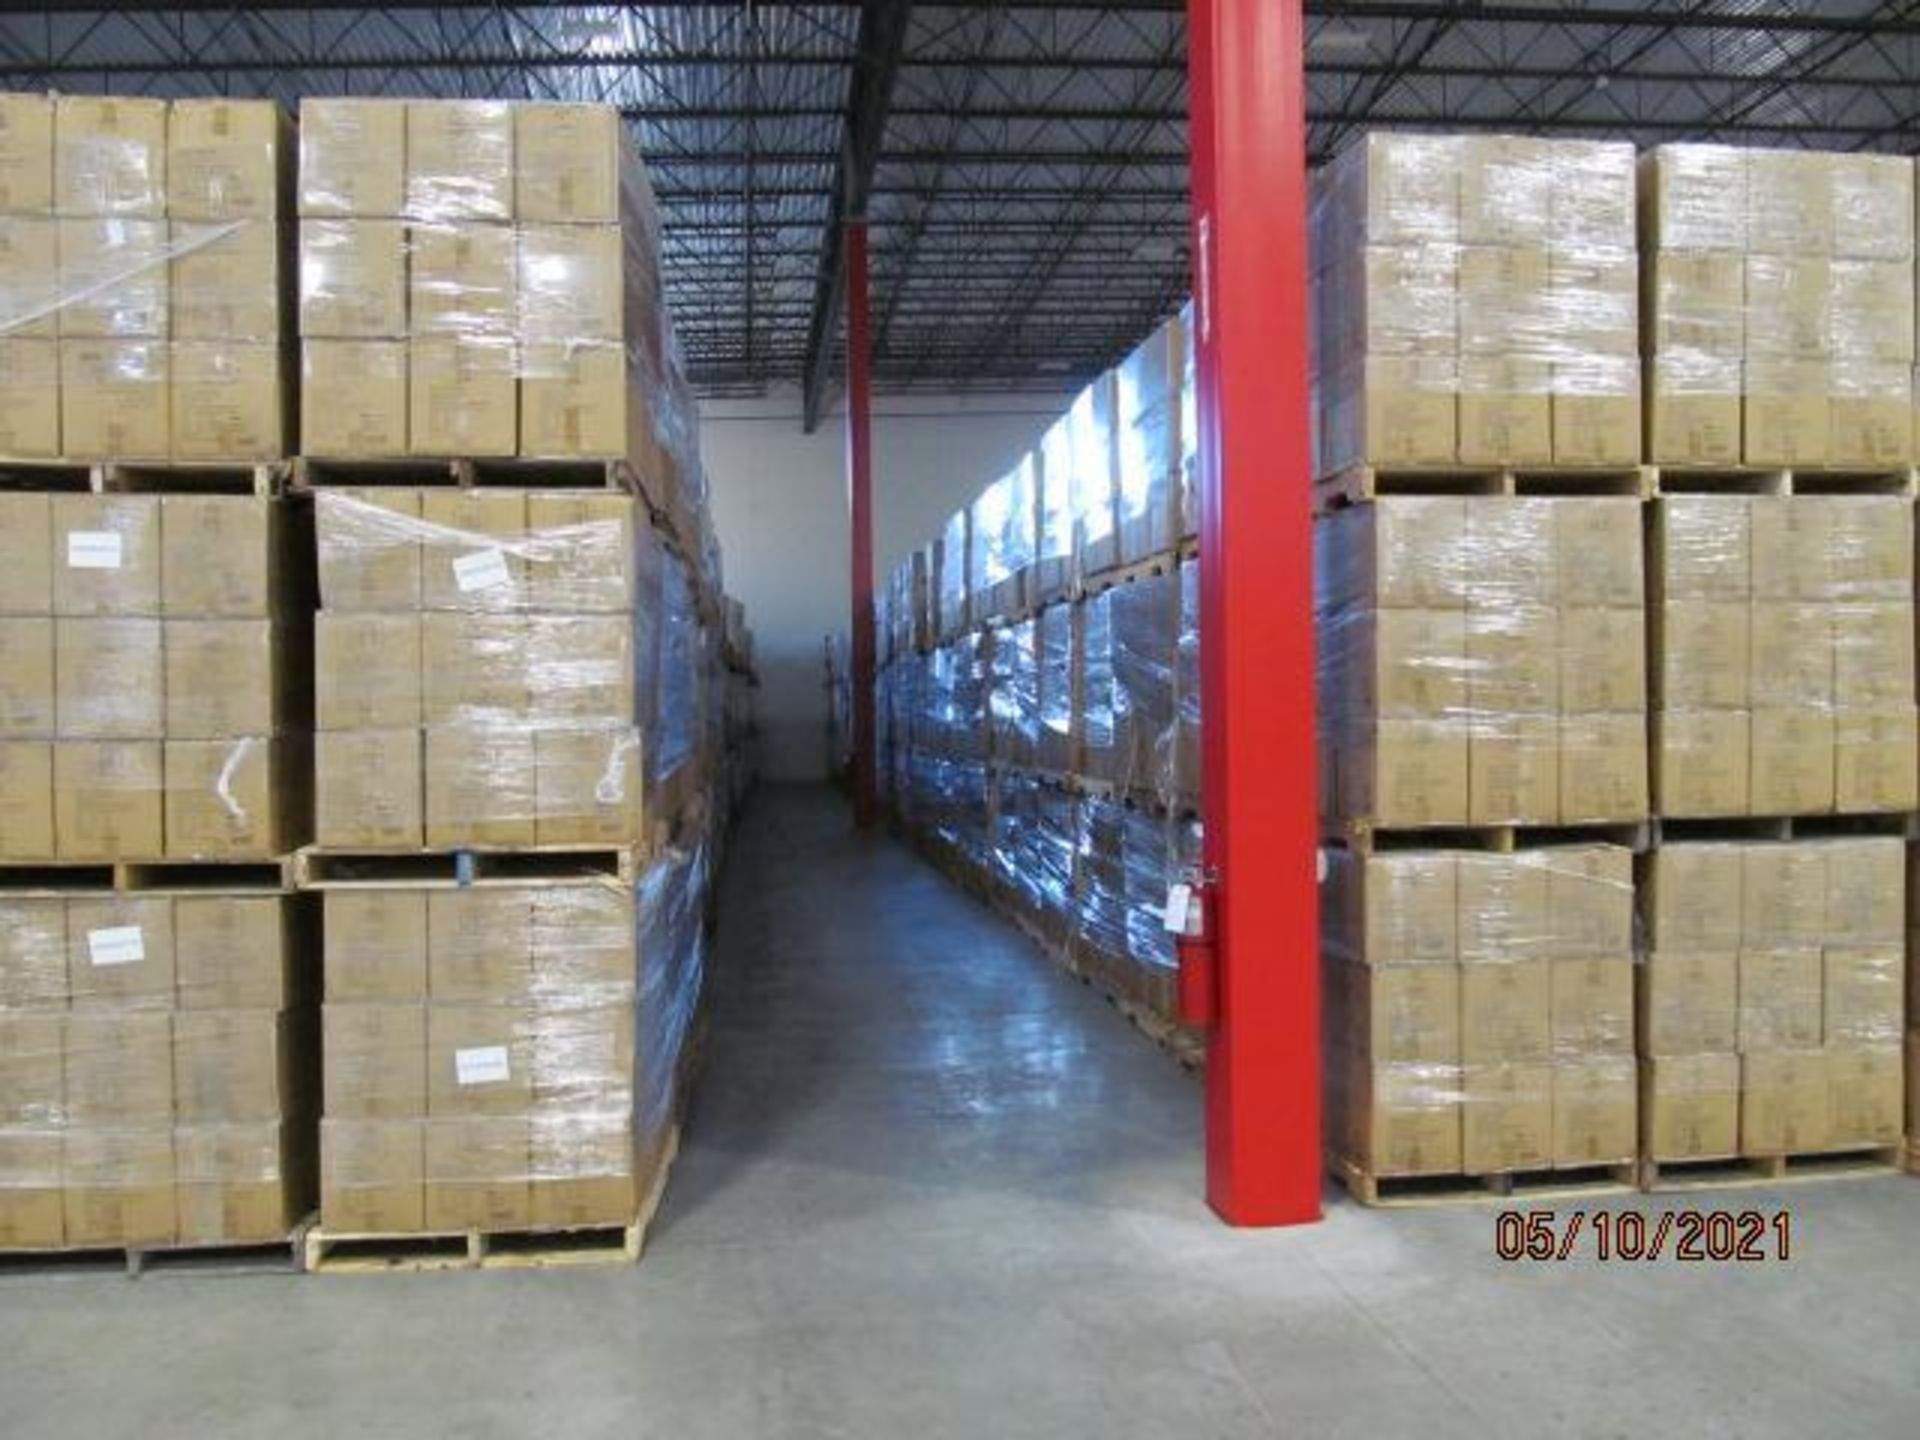 Lot of Waxman Kleen Freak Sanitizing Wipes consisting of 269,568 packages on 416 pallets. Each packa - Image 9 of 11